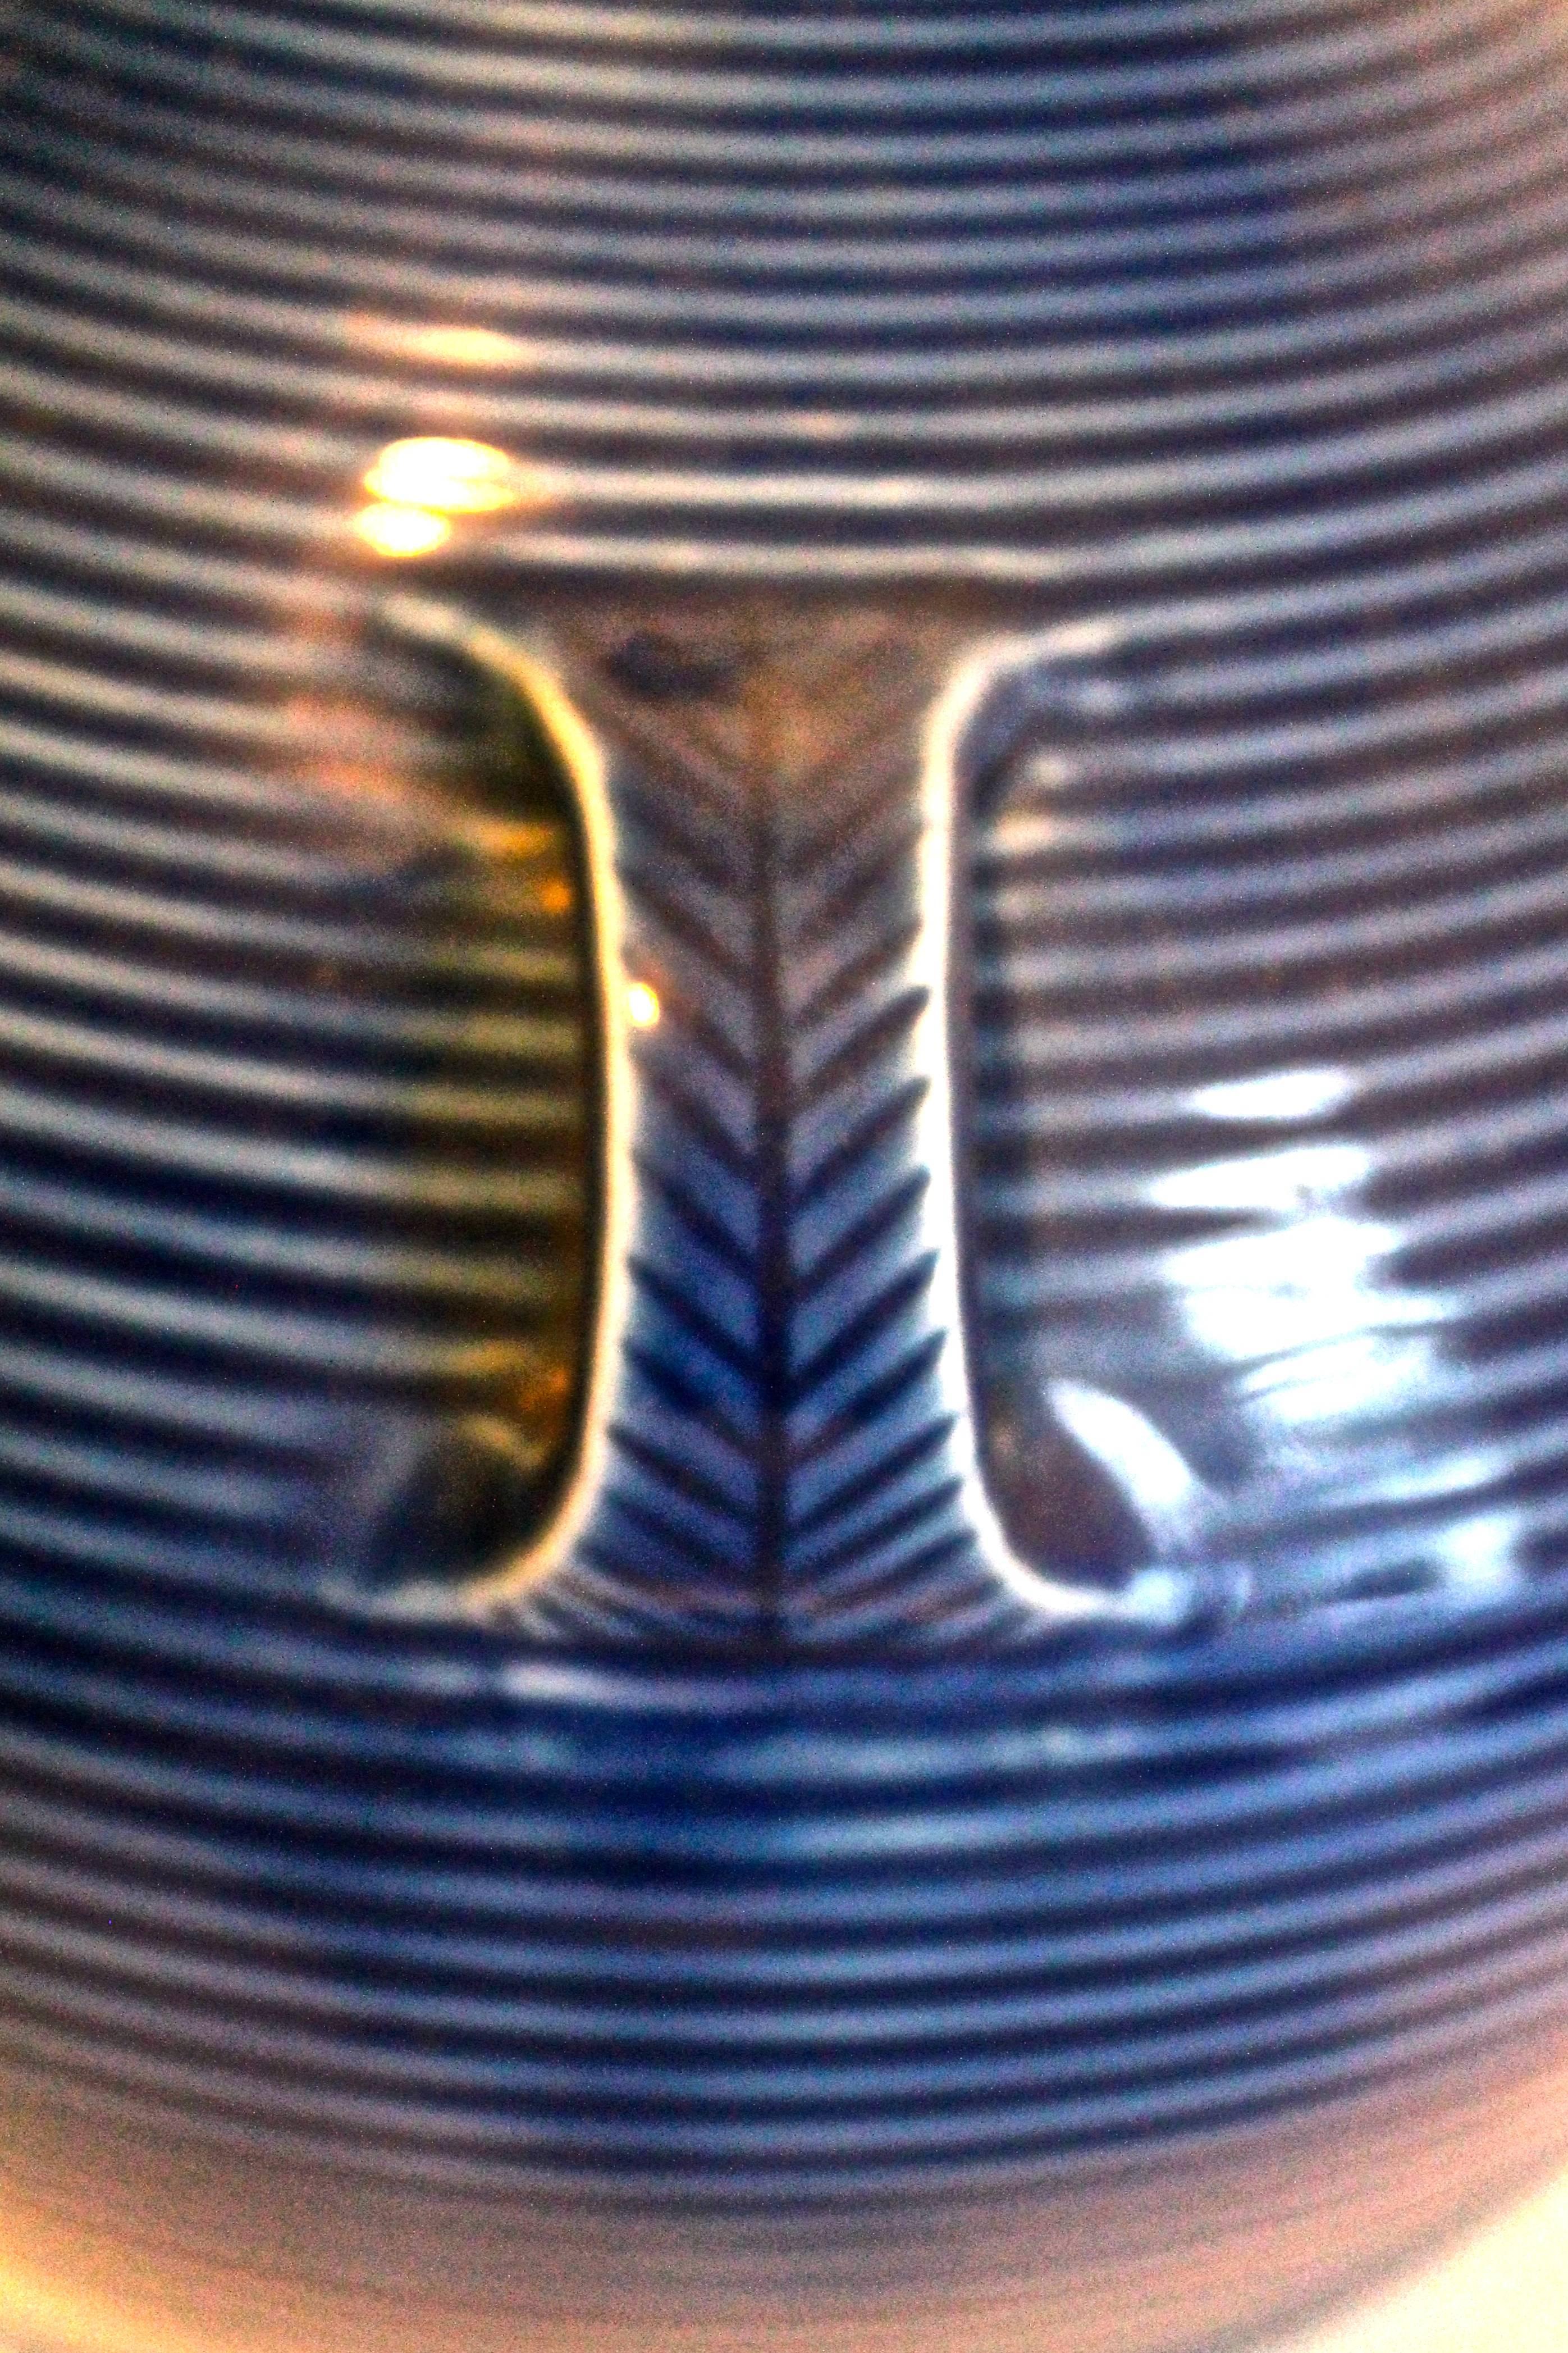 Fukagawa Japanese Modernist Porcelain Vase In Excellent Condition For Sale In Sharon, CT